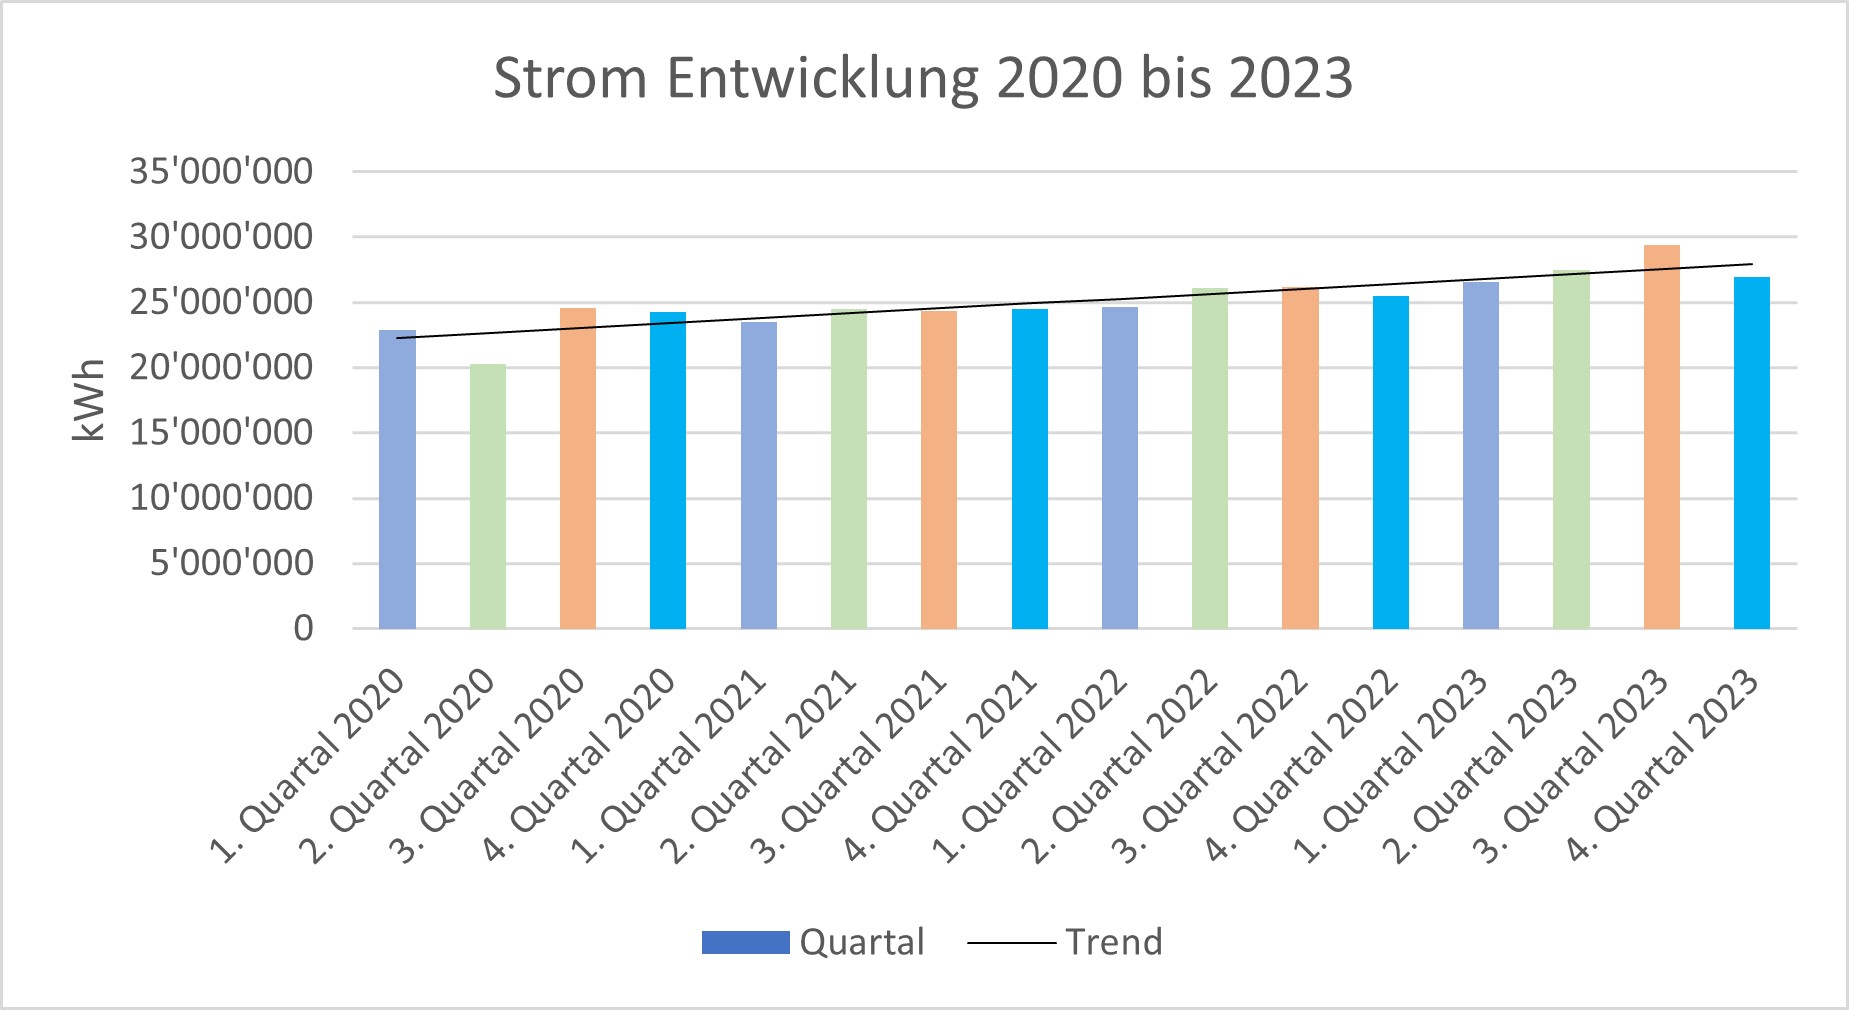 Enlarged view: The graph shows the total electricity consumption of ETH Zurich on the Hönggerberg campus, on the Centre 365ֱ_365Ͷע-Ͷ and in Schwerzenbach and Lindau-Eschikon for all quarters in the period from 2020 to 2023.